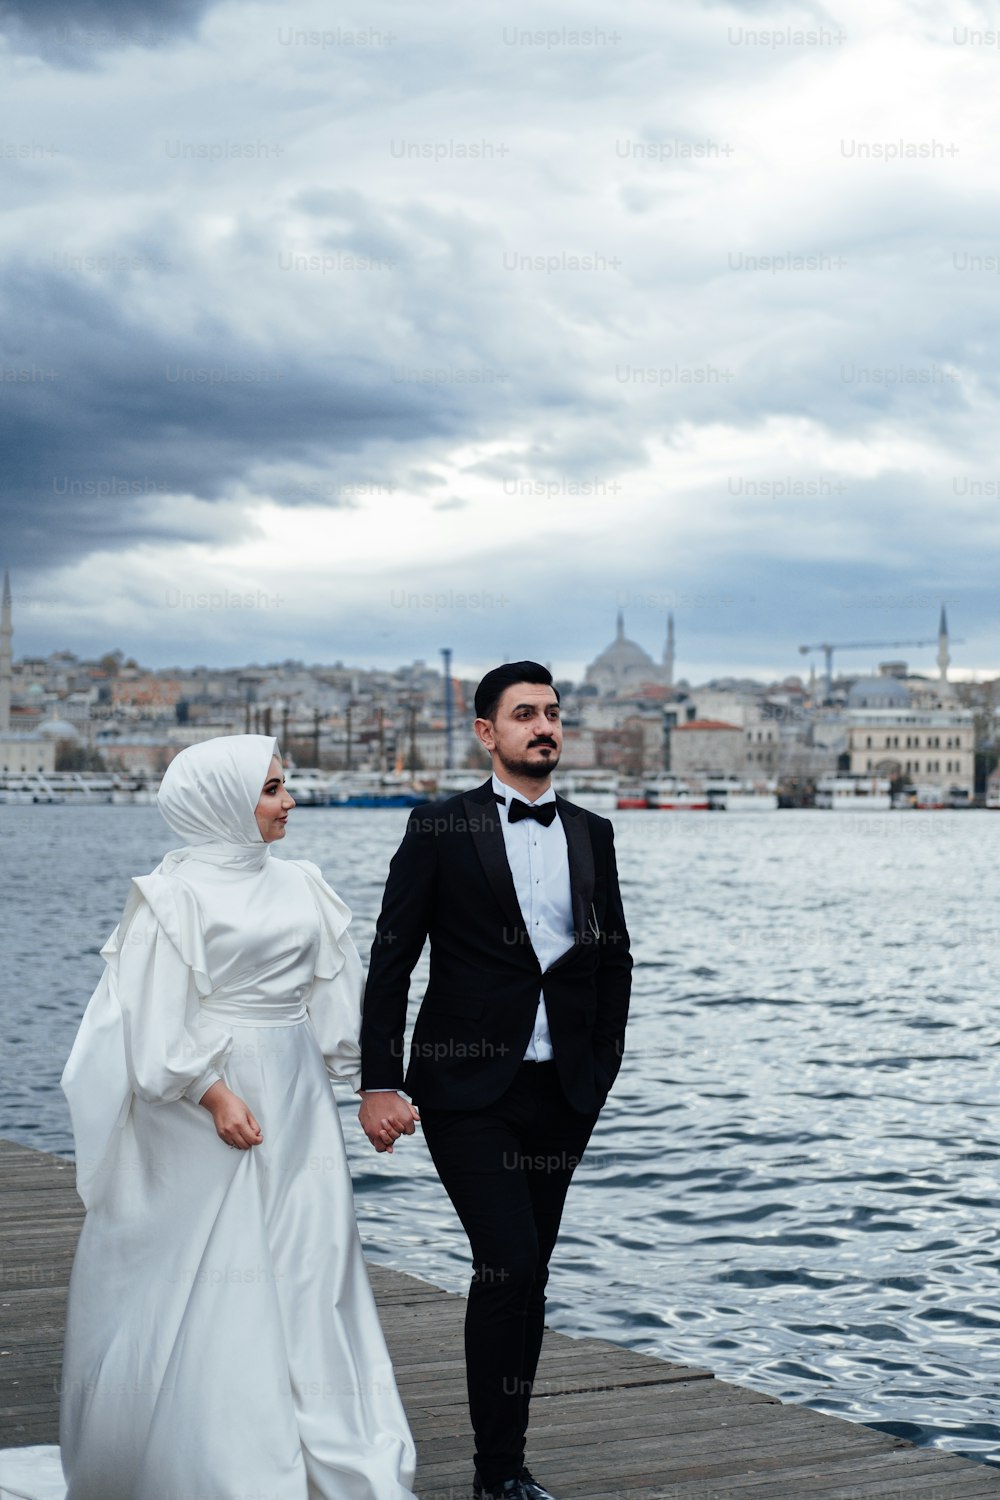 a man and woman in wedding attire